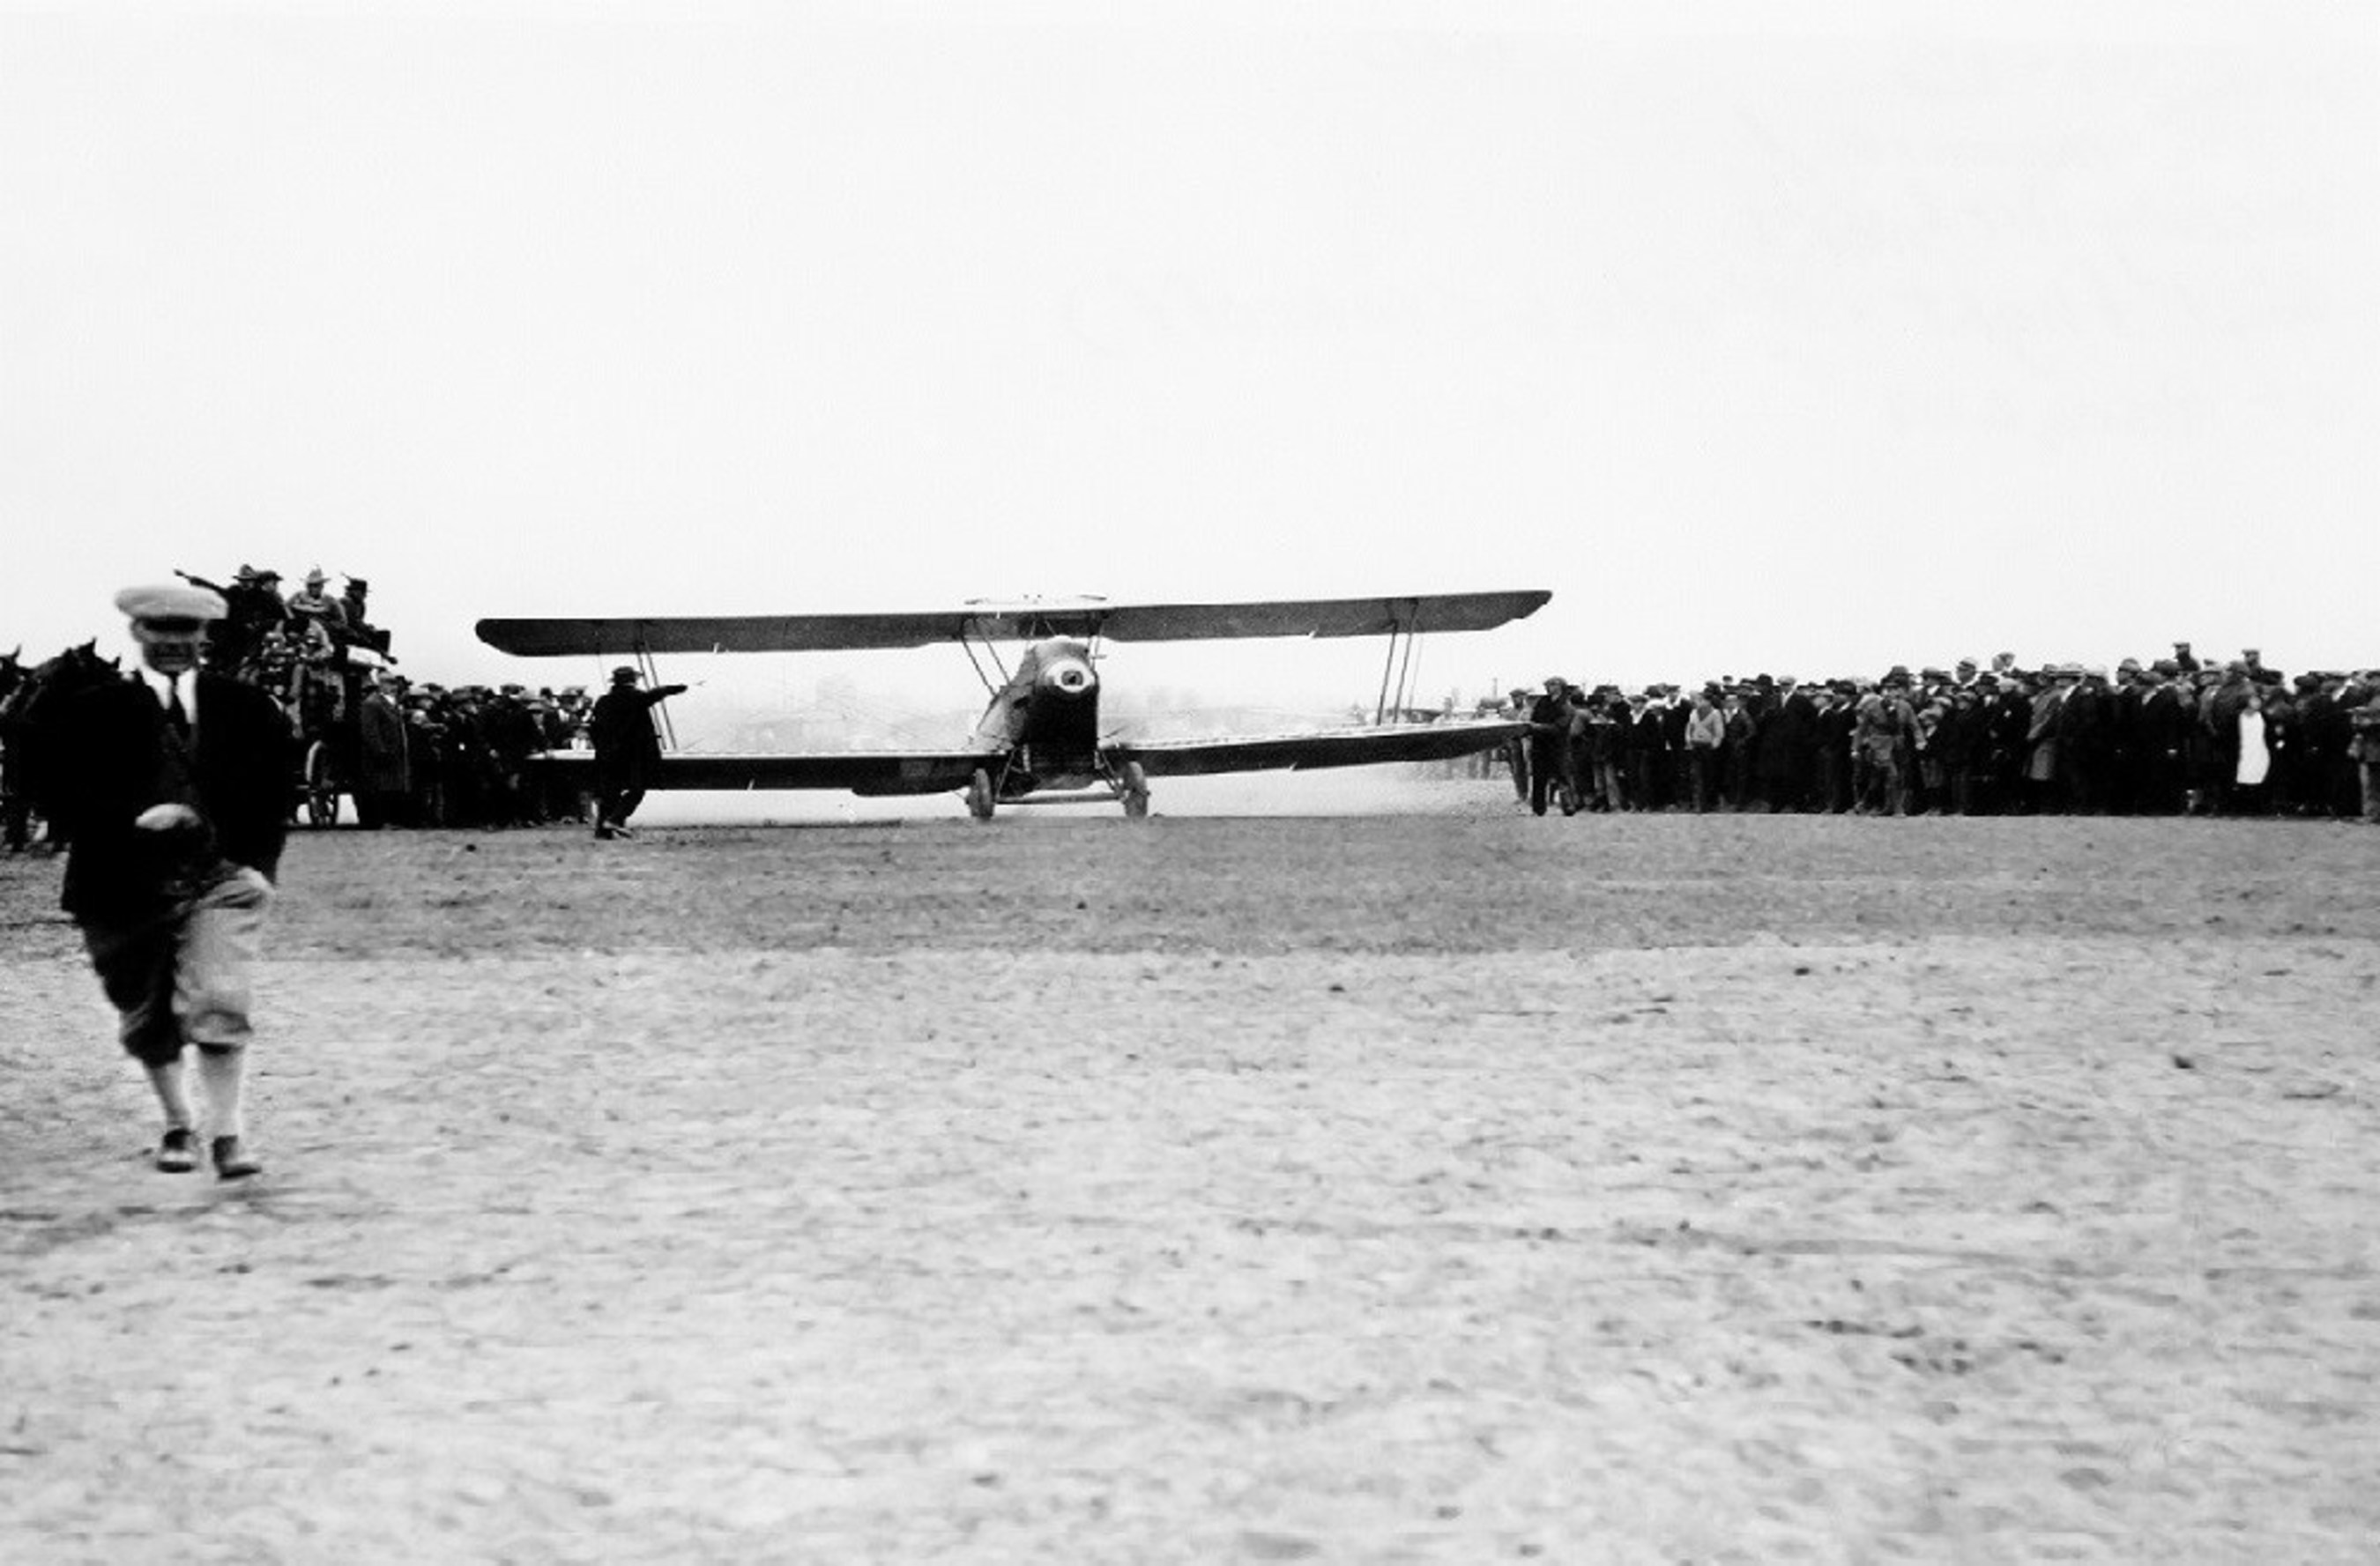 United launched its first flight on April 6, 1926